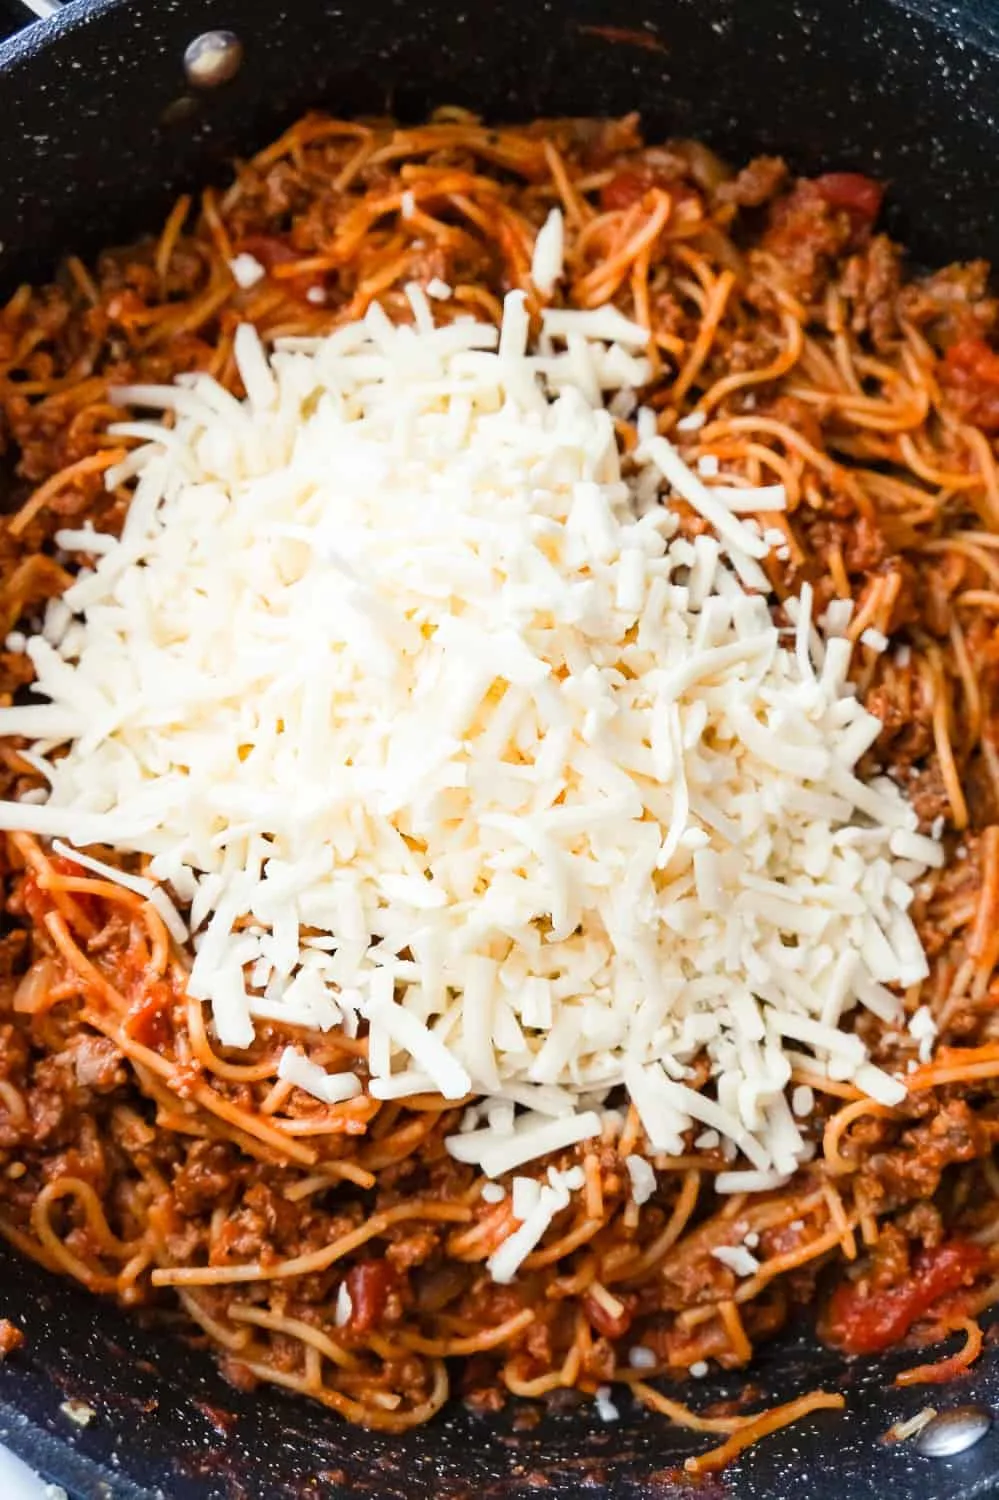 shredded mozzarella on top of spaghetti bolognese in a pan